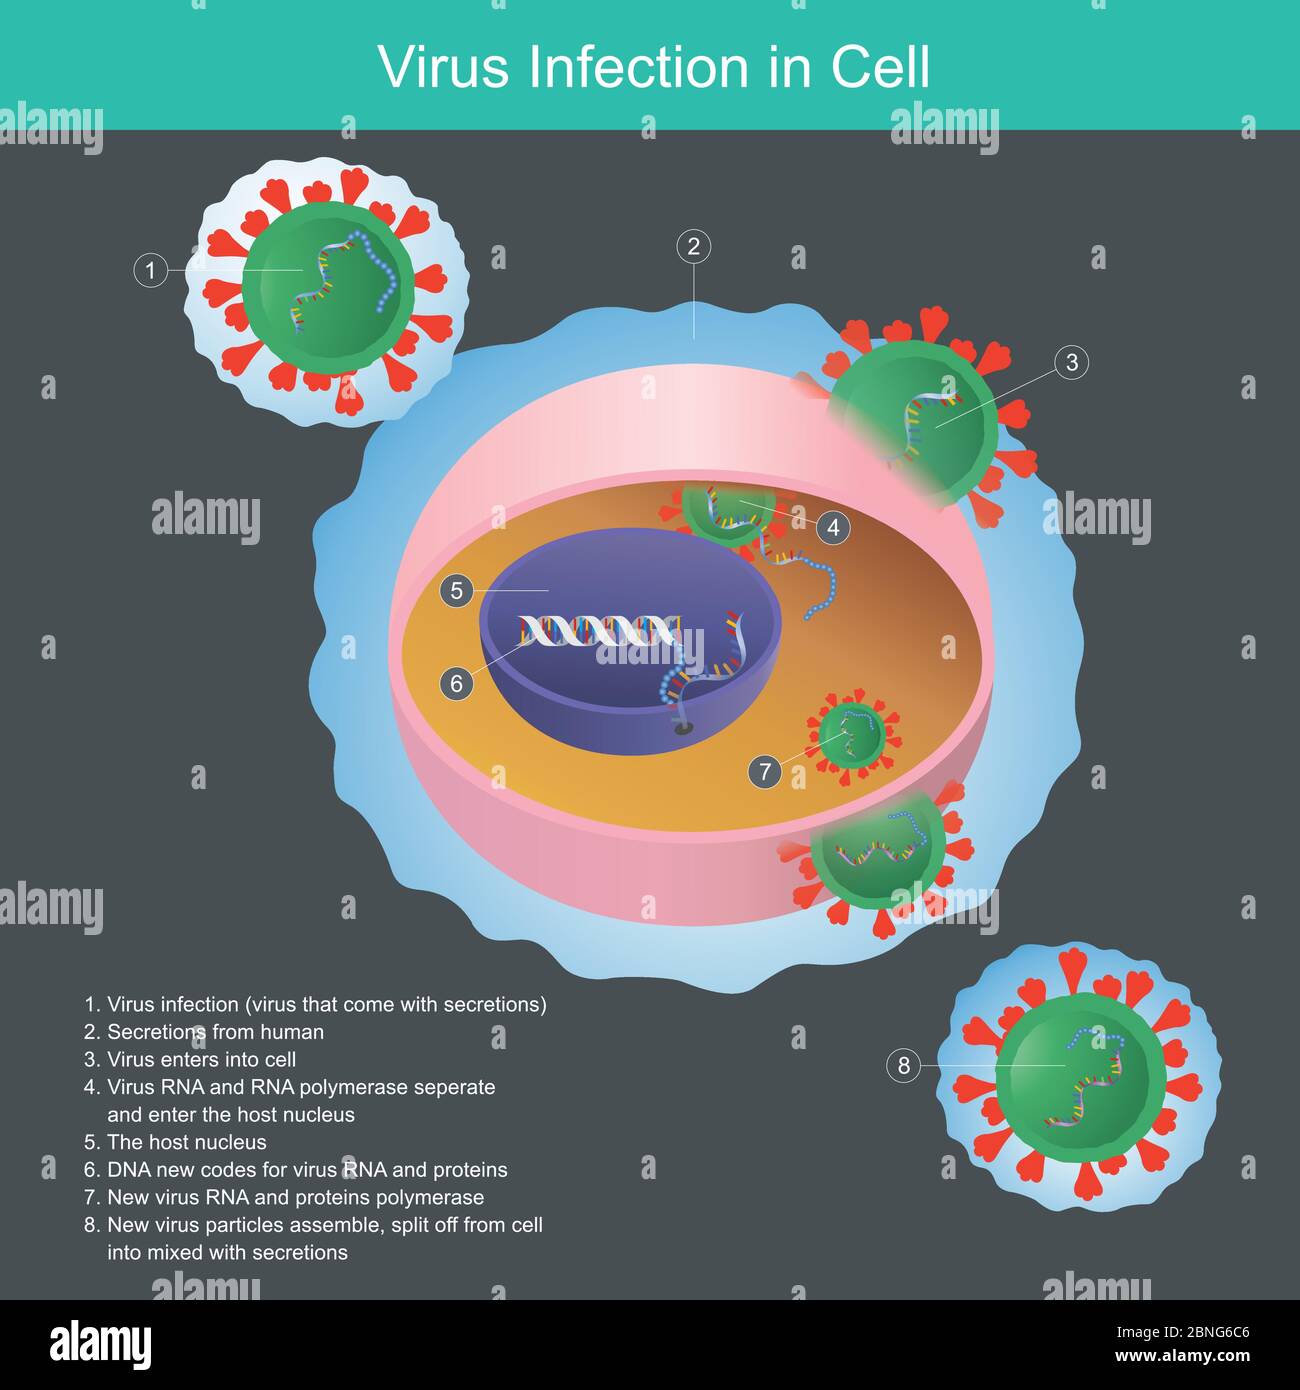 Virus Infection in Cell. Illustration explain virus from human secretions infection enters into cell and nucleus. Stock Vector